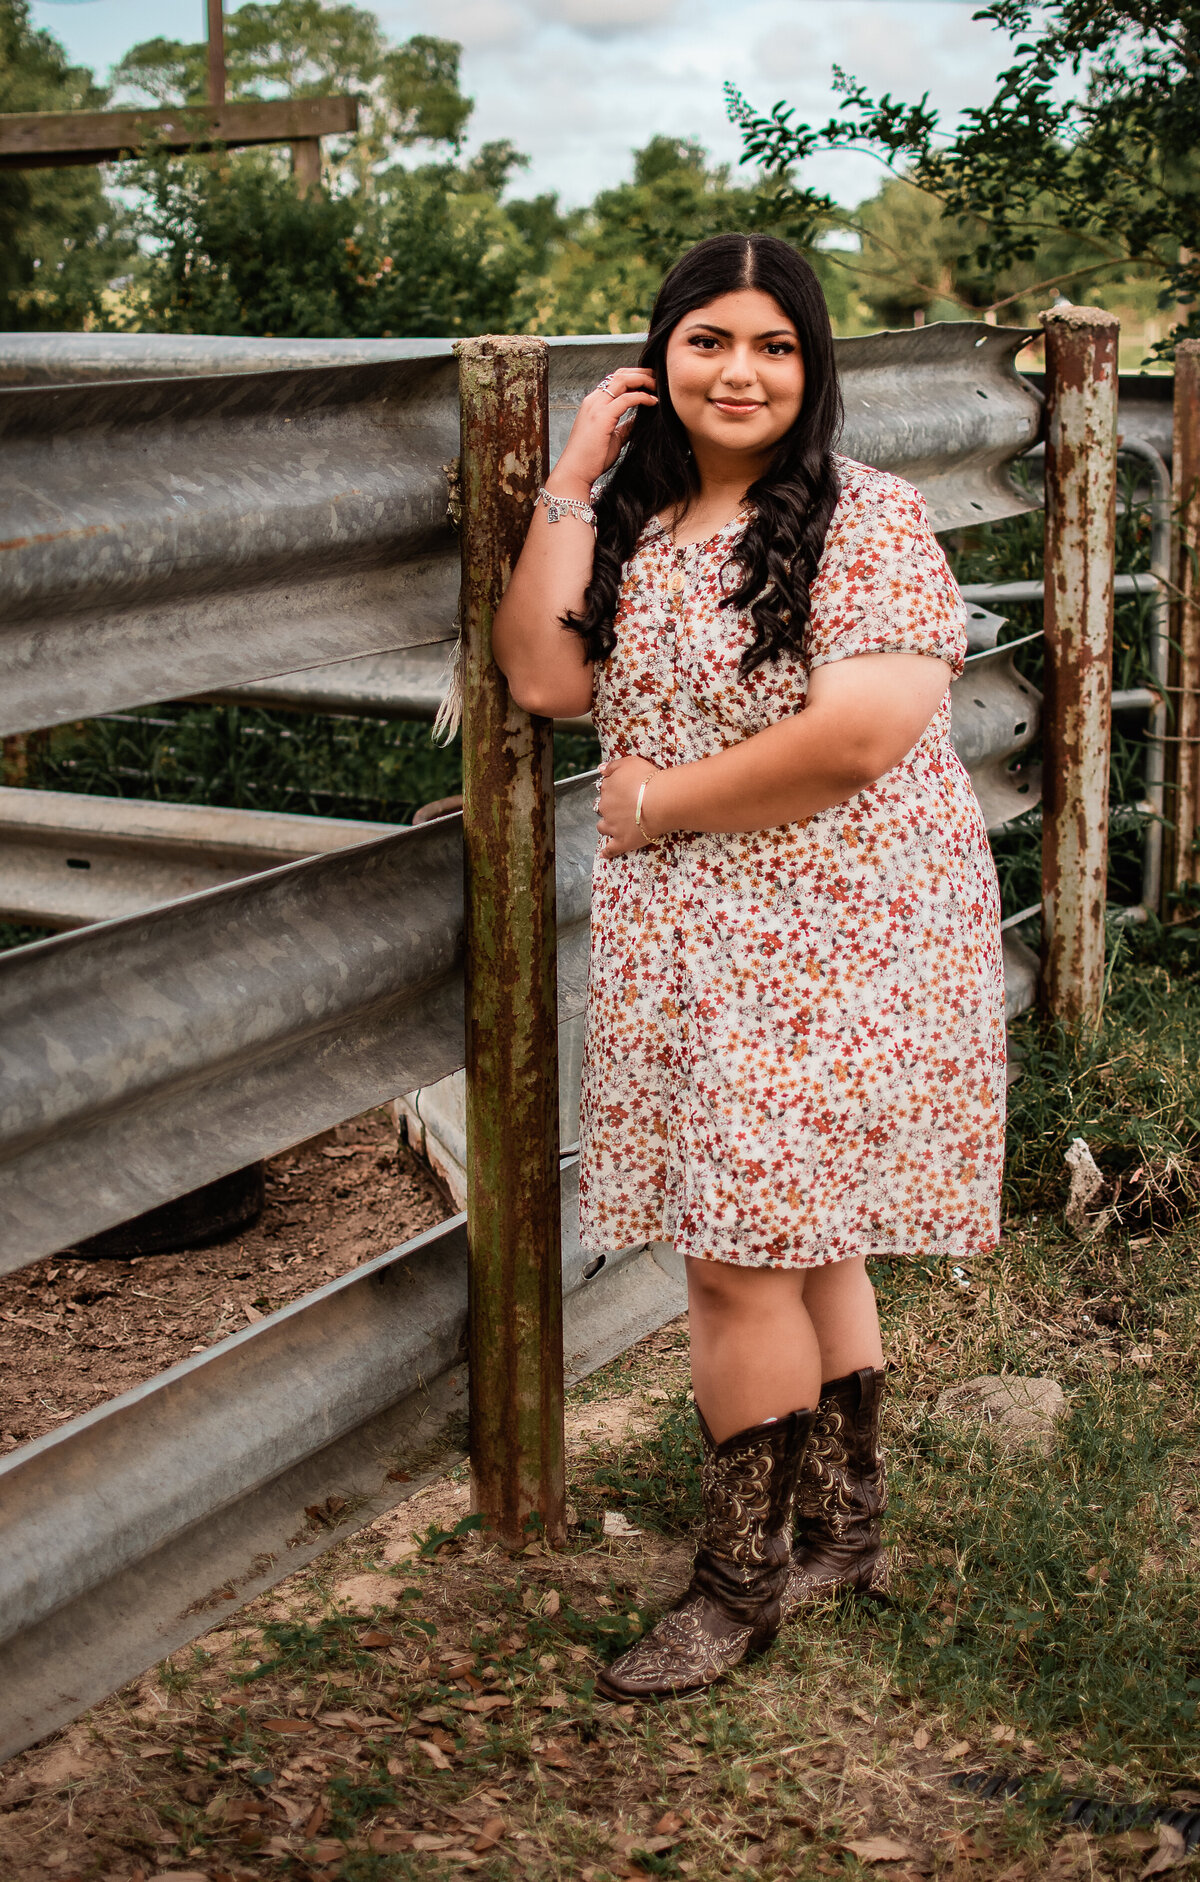 A graduate of aHouston high school tucks her hair behind her ear while she leans against a rustic tin fence.